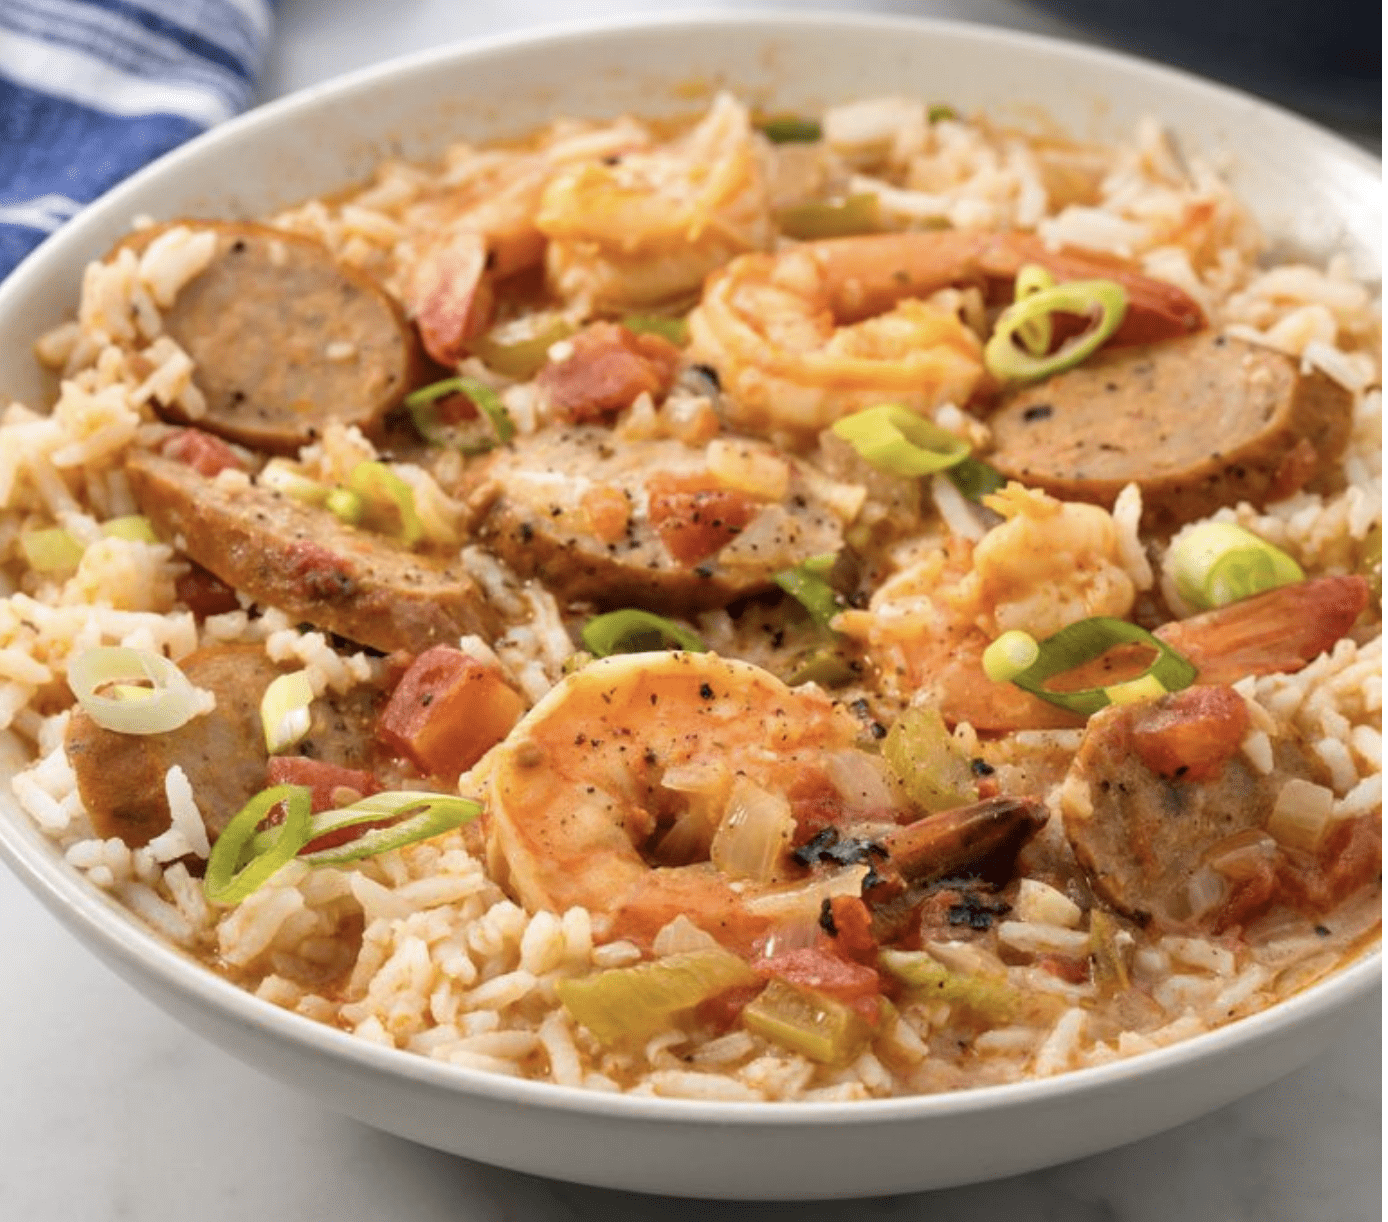 Creole-Style-Shrimp-and-Sausage-Gumbo-Recipe